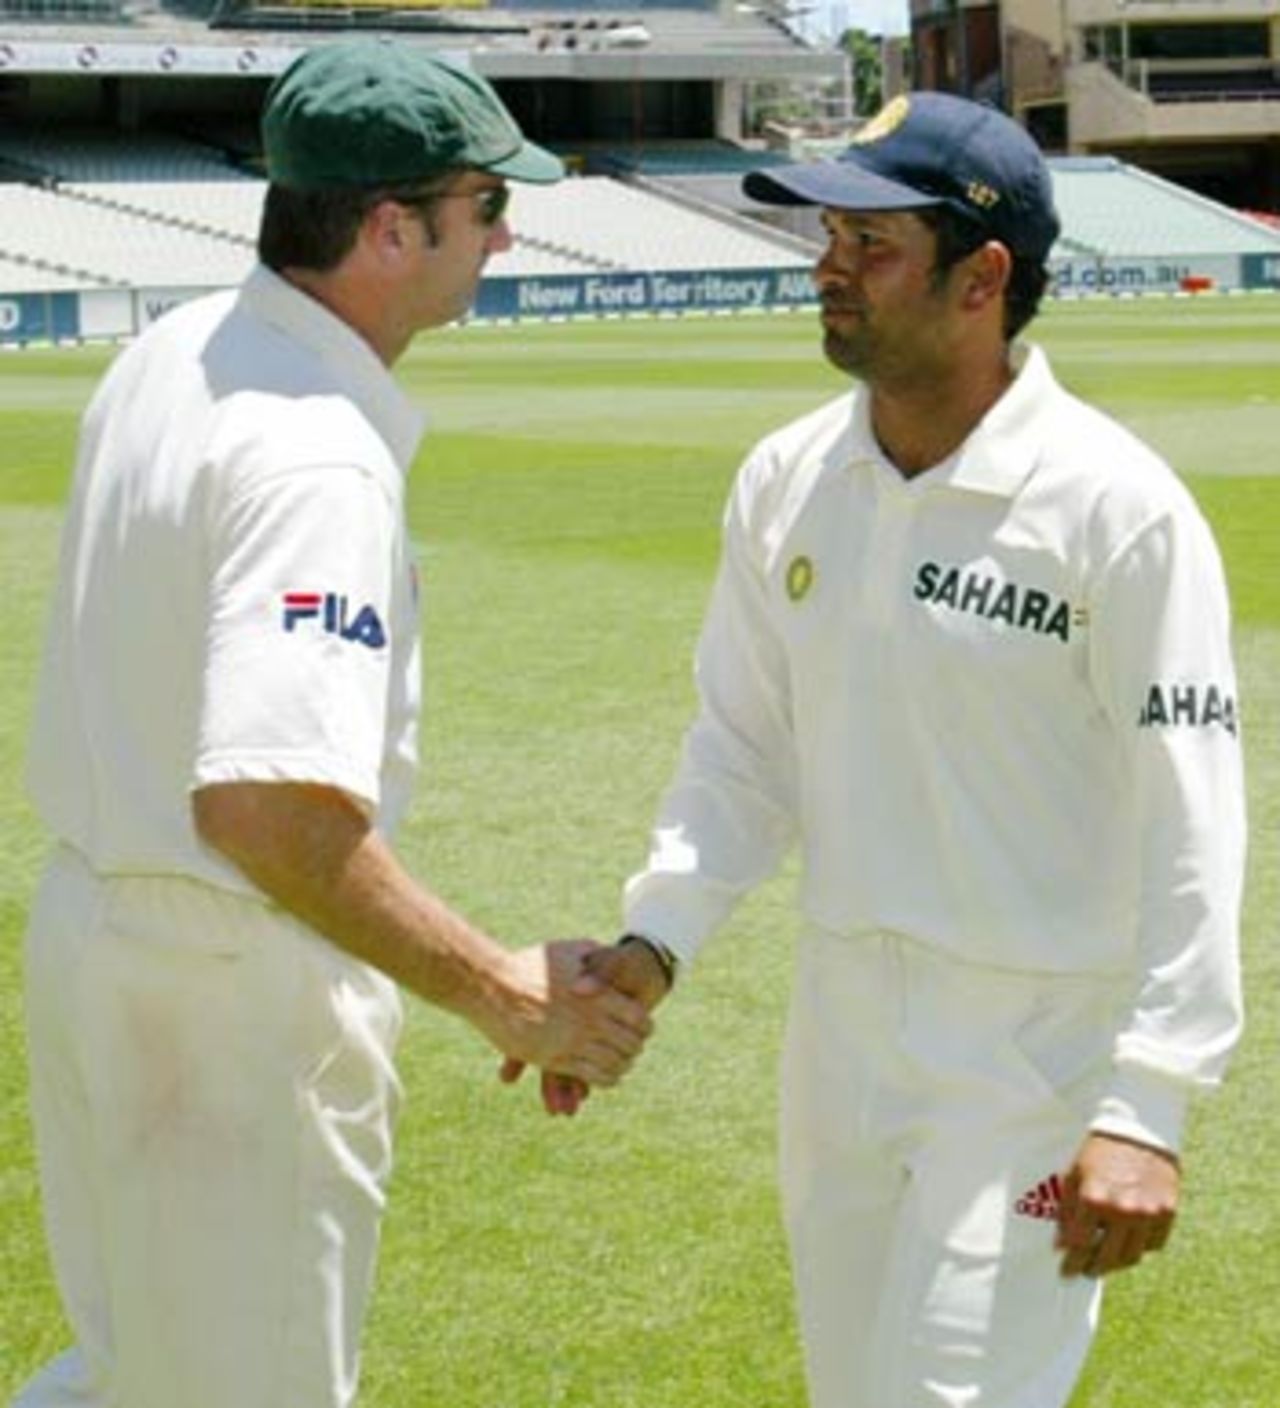 Steve Waugh commiserates with a disappointed Sachin Tendulkar, Australia v India, 3rd Test, Melbourne, 5th day, December 30, 2003